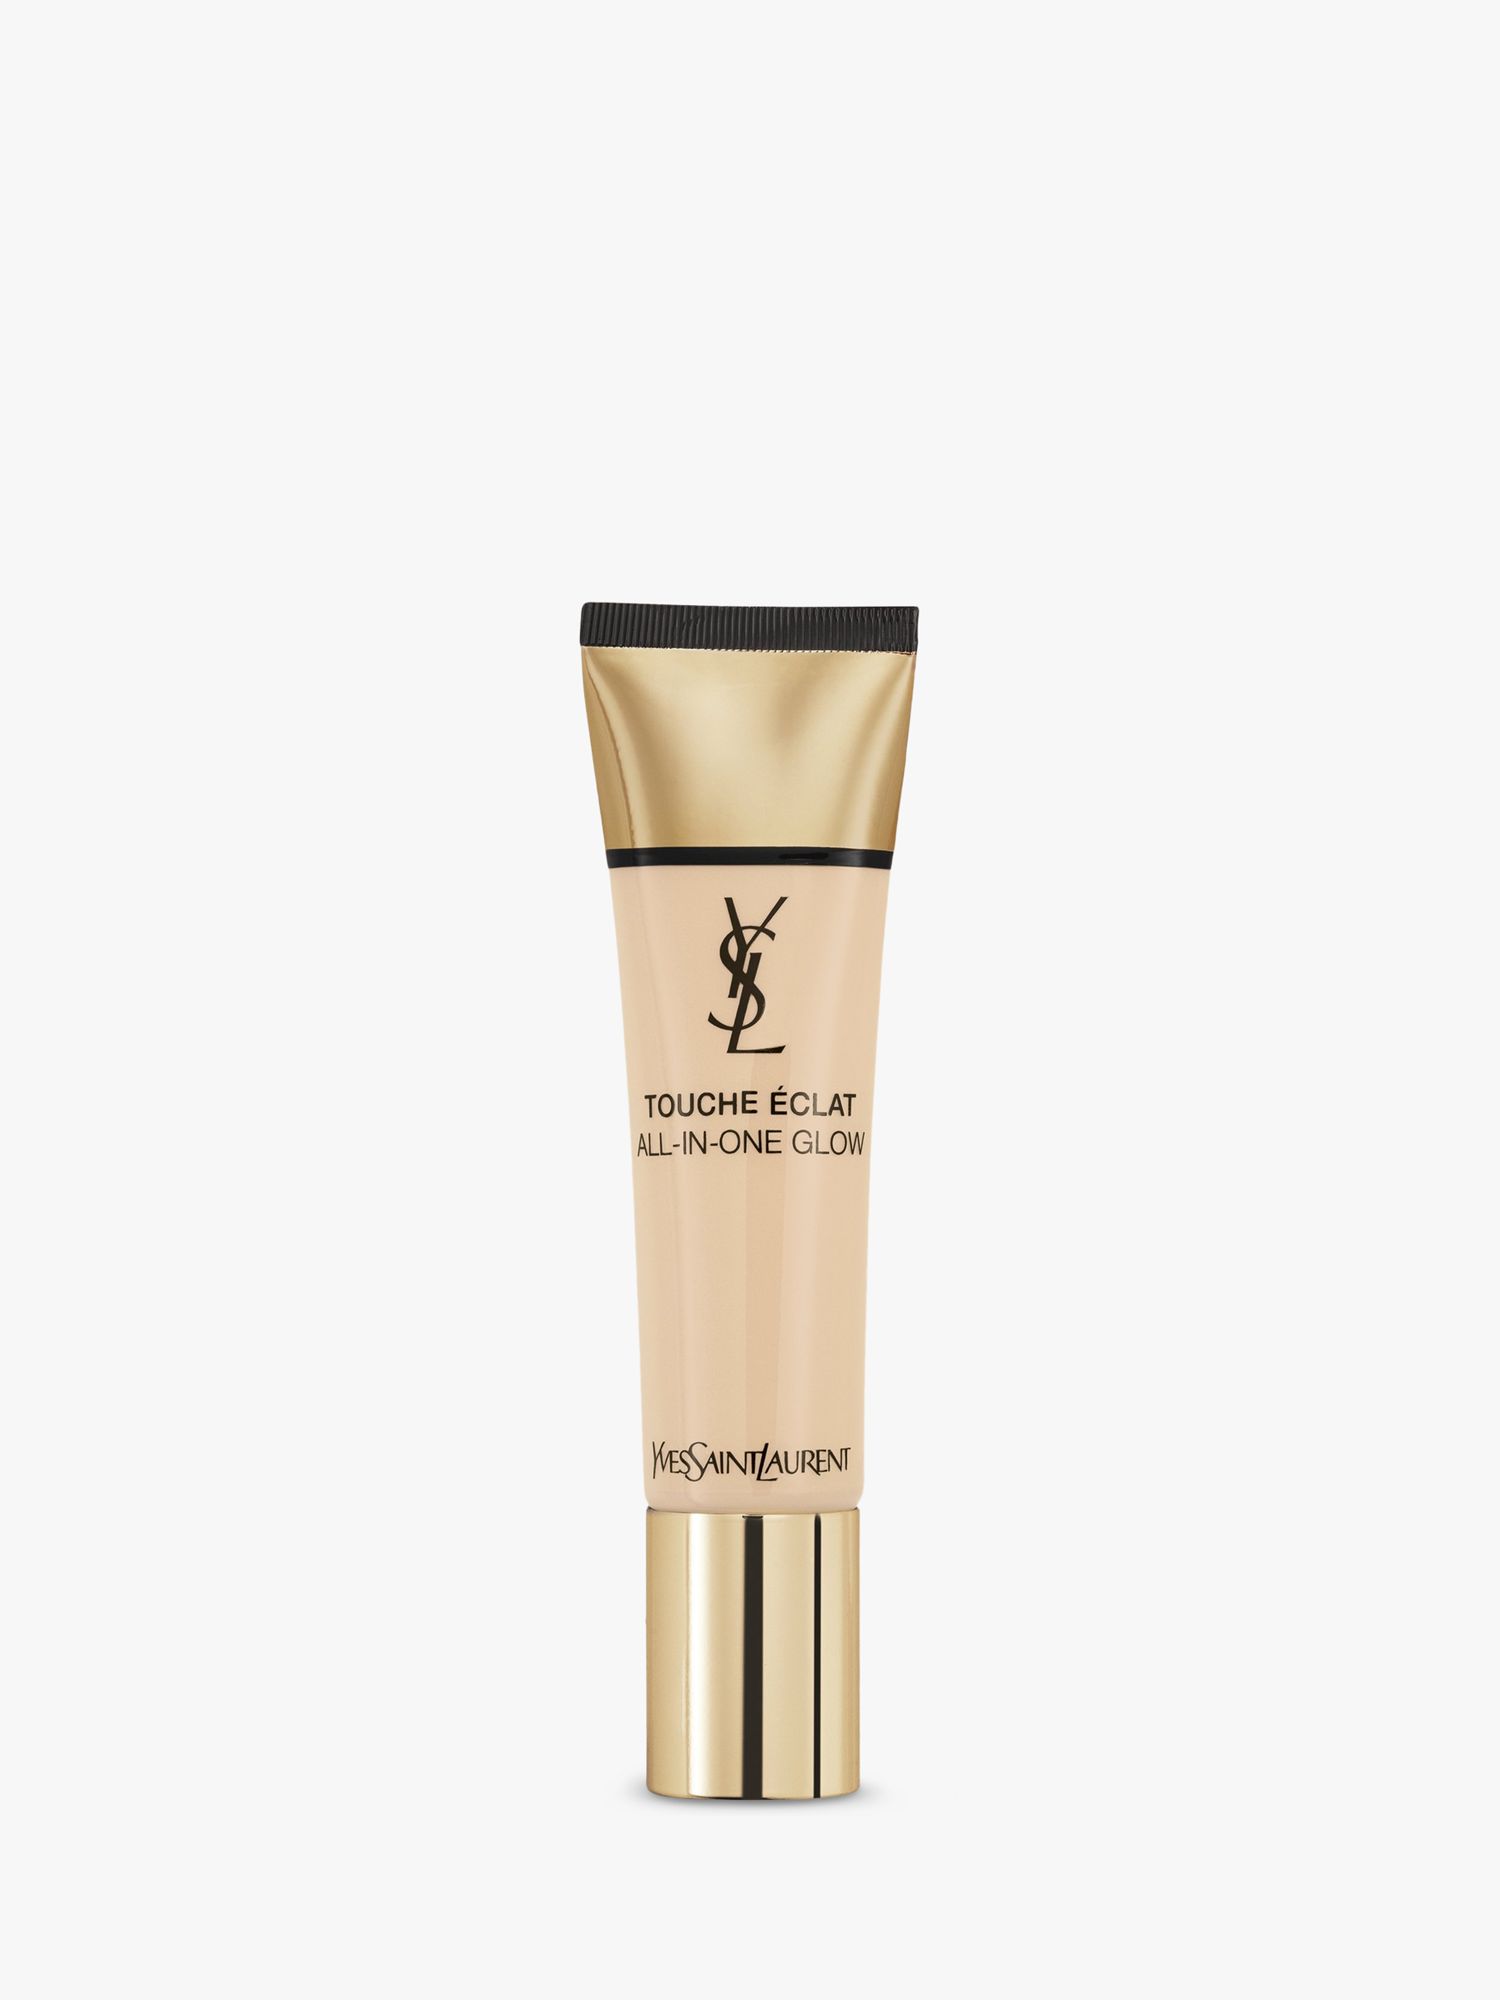 Yves Saint Laurent Touche Éclat All-In-One Glow SPF23